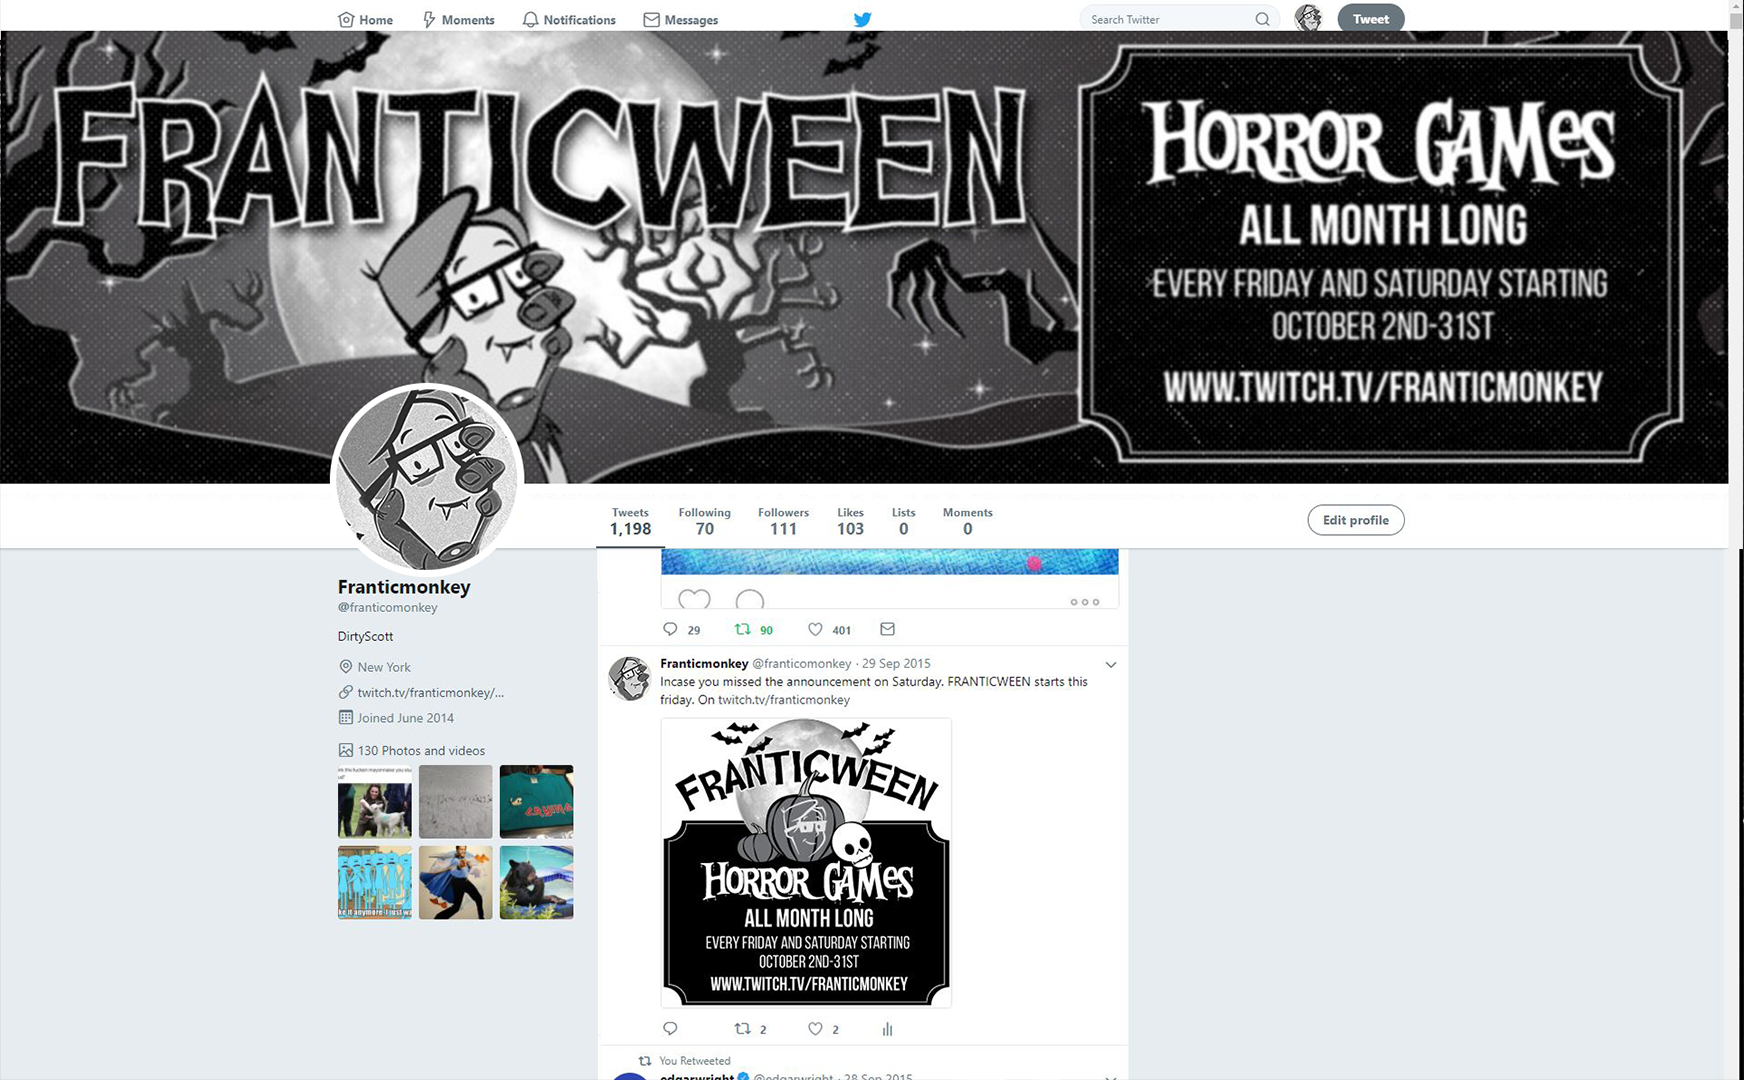 Franticween-Twitter-Page.png